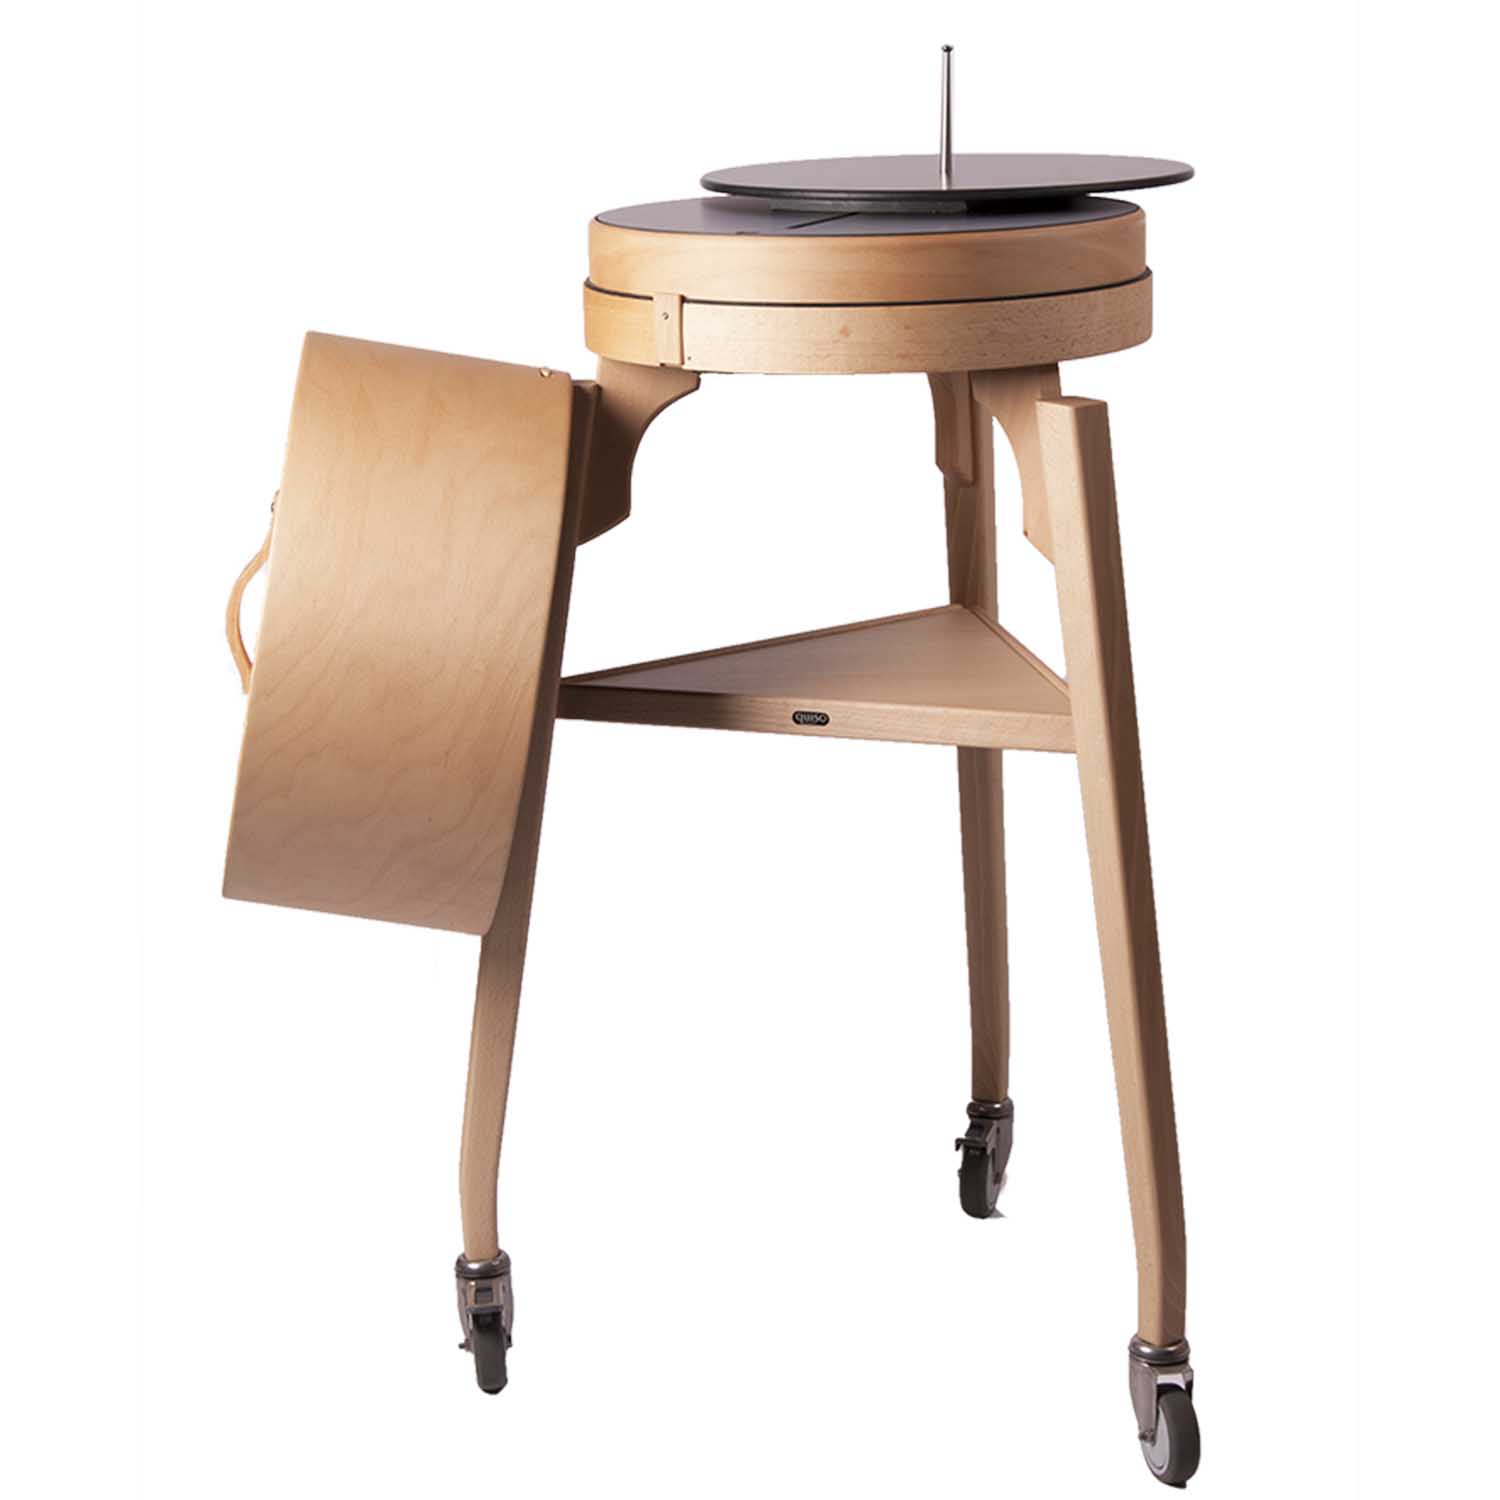 COQ cheese trolley in natural beech from QUISO